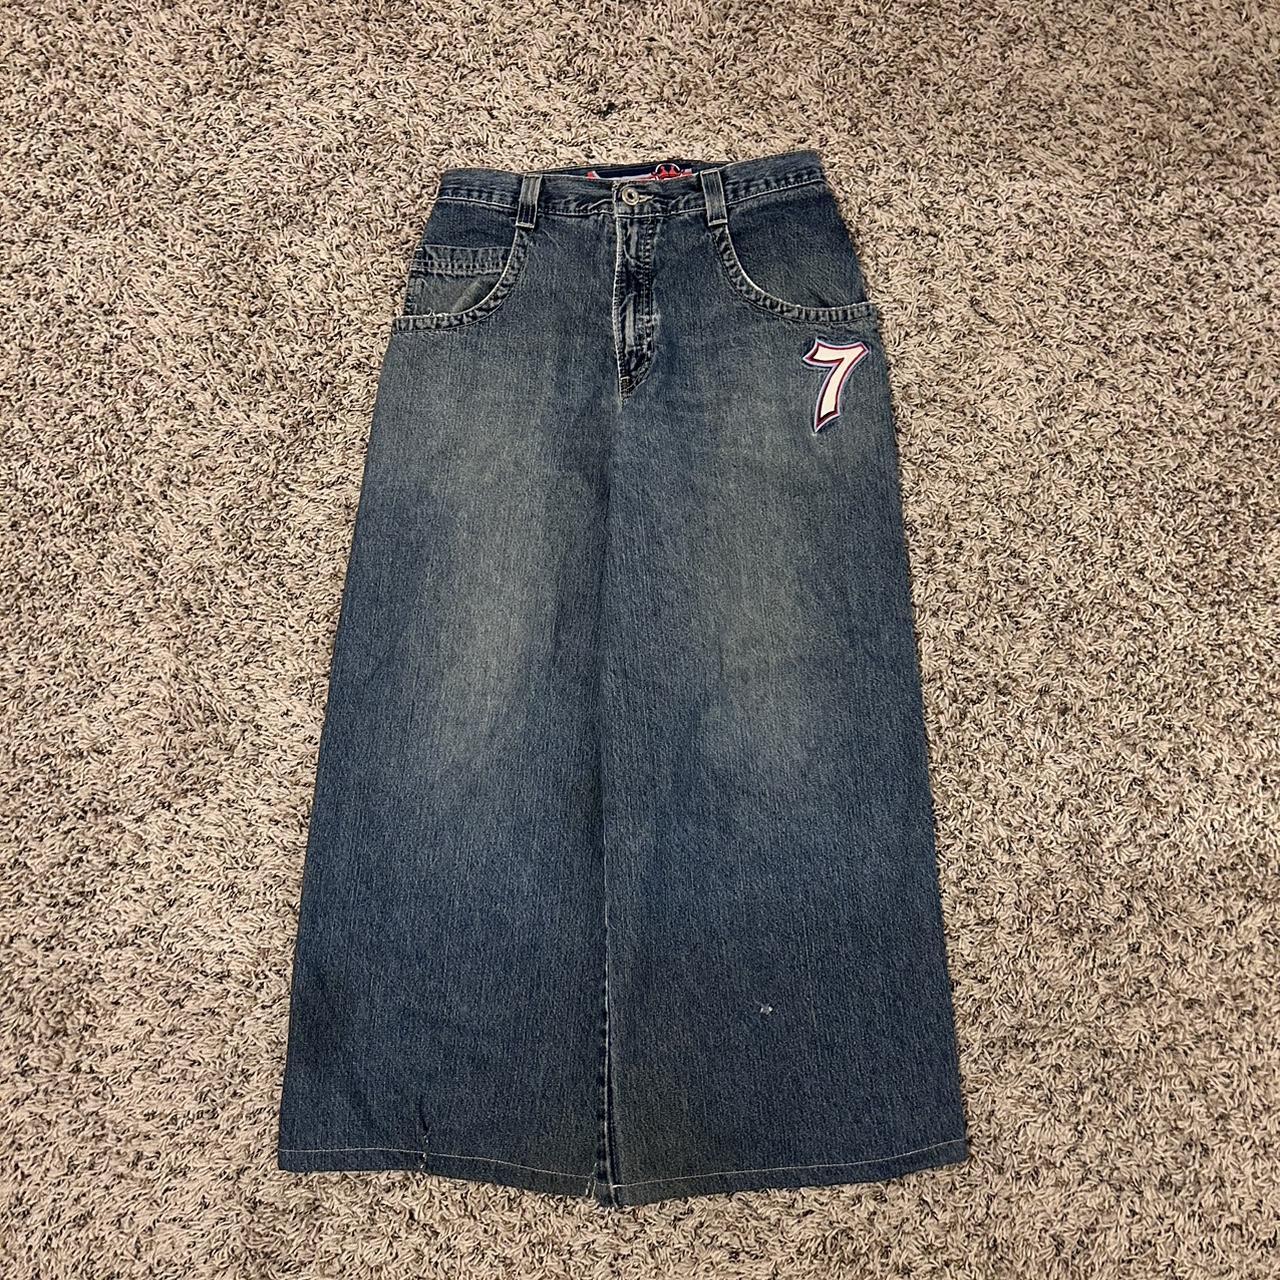 tailored jnco lucky sevens tagged 34x32 now a... - Depop